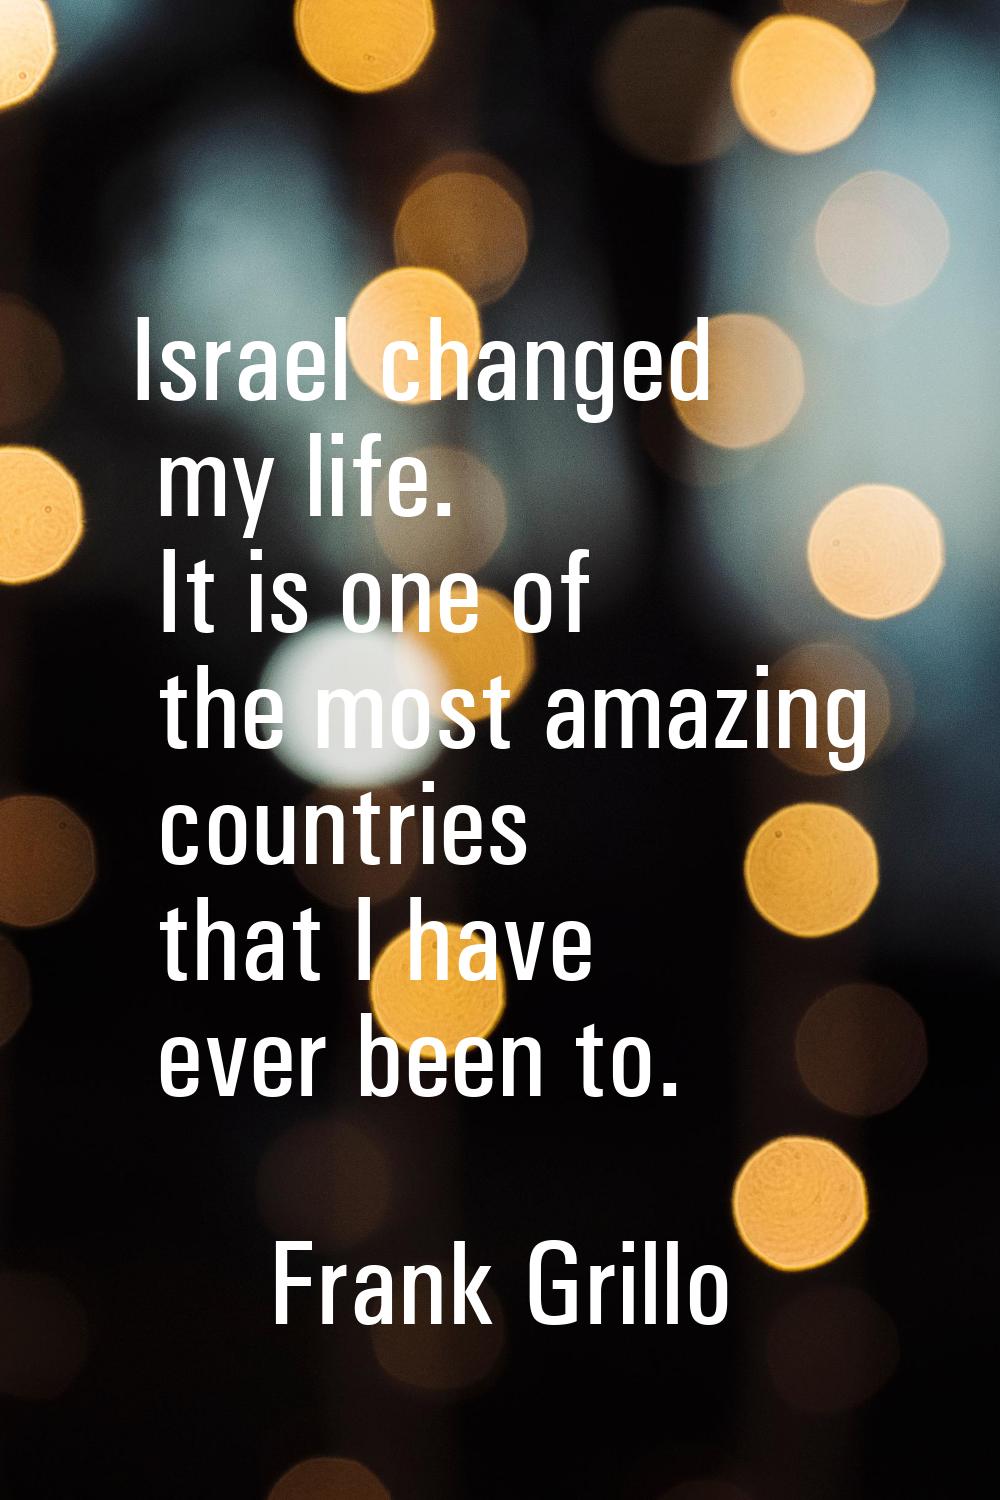 Israel changed my life. It is one of the most amazing countries that I have ever been to.